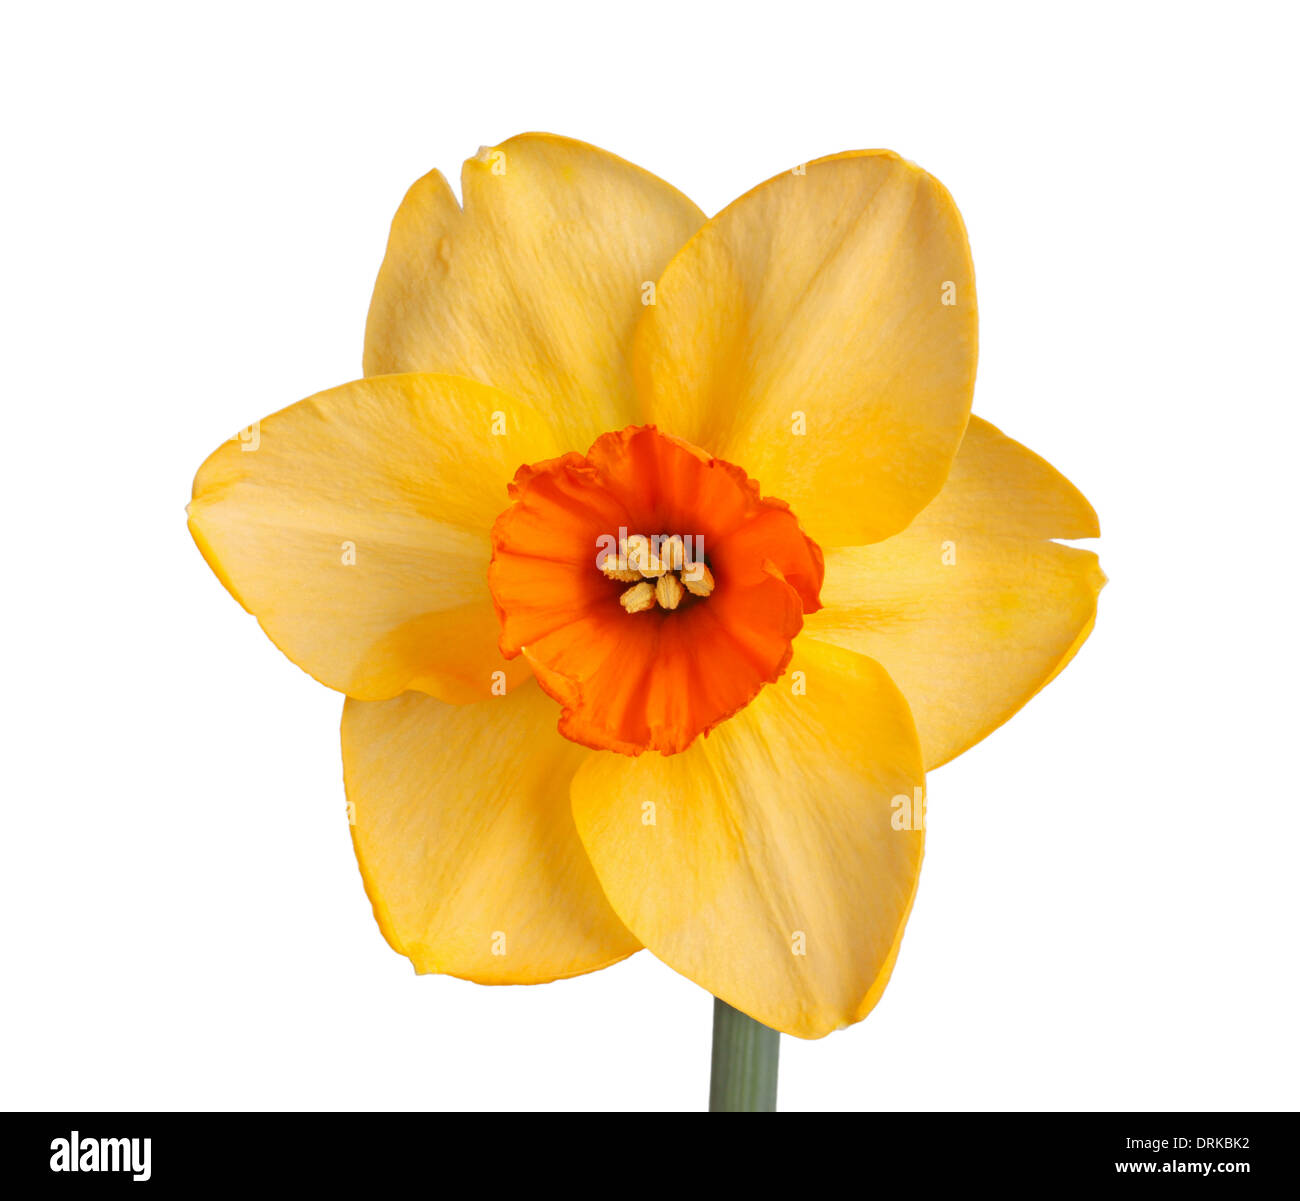 Single flower of the orange and red, small-cup daffodil cultivar Red Diamond isolated against a white background Stock Photo